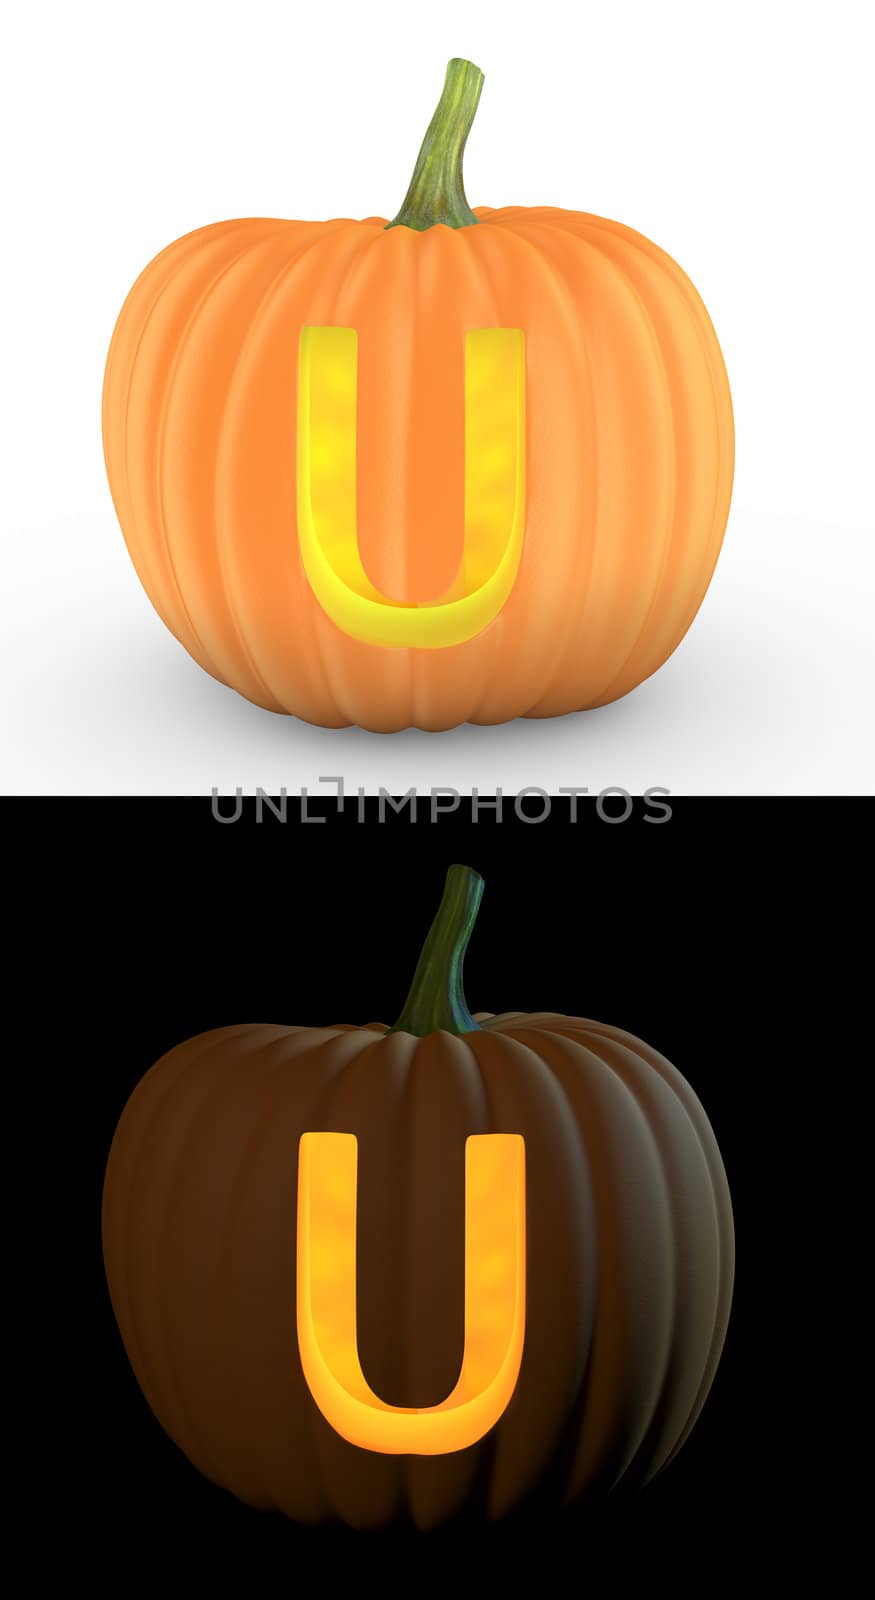 U letter carved on pumpkin jack lantern isolated on and white background